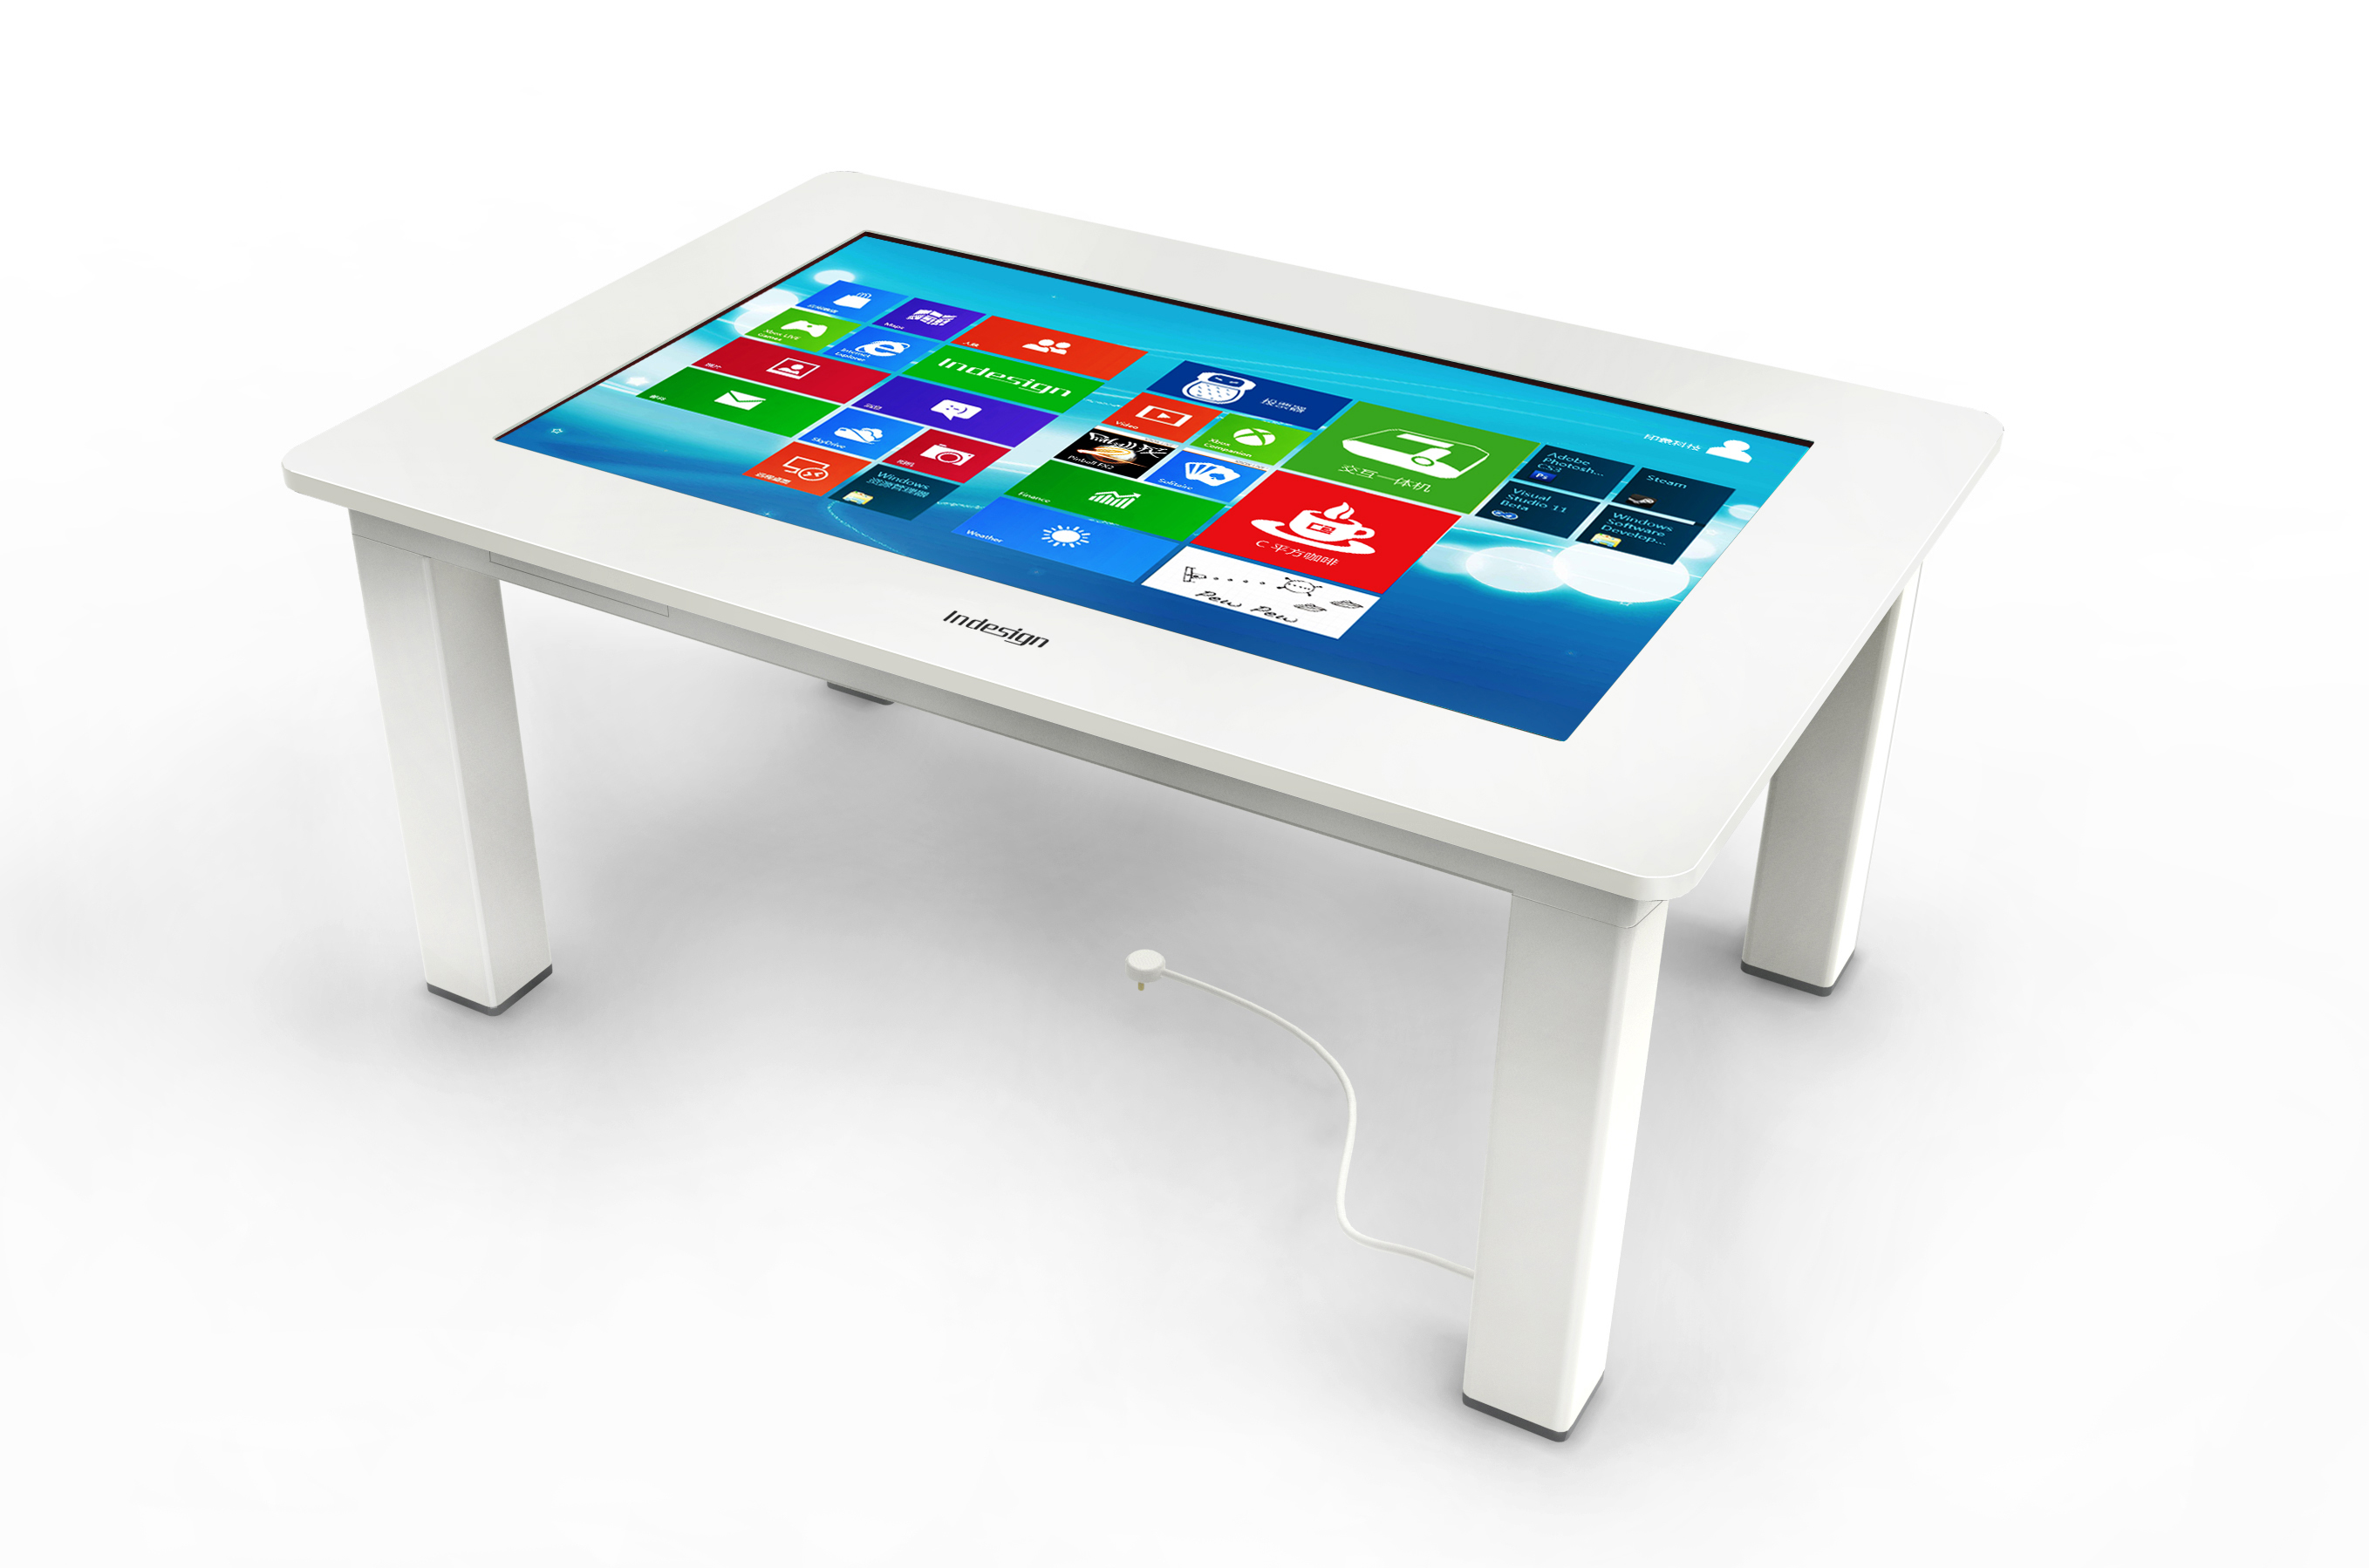 Indesign Multi-touch Table uses new infrared multi-touch technology which can supports maximum 256po...